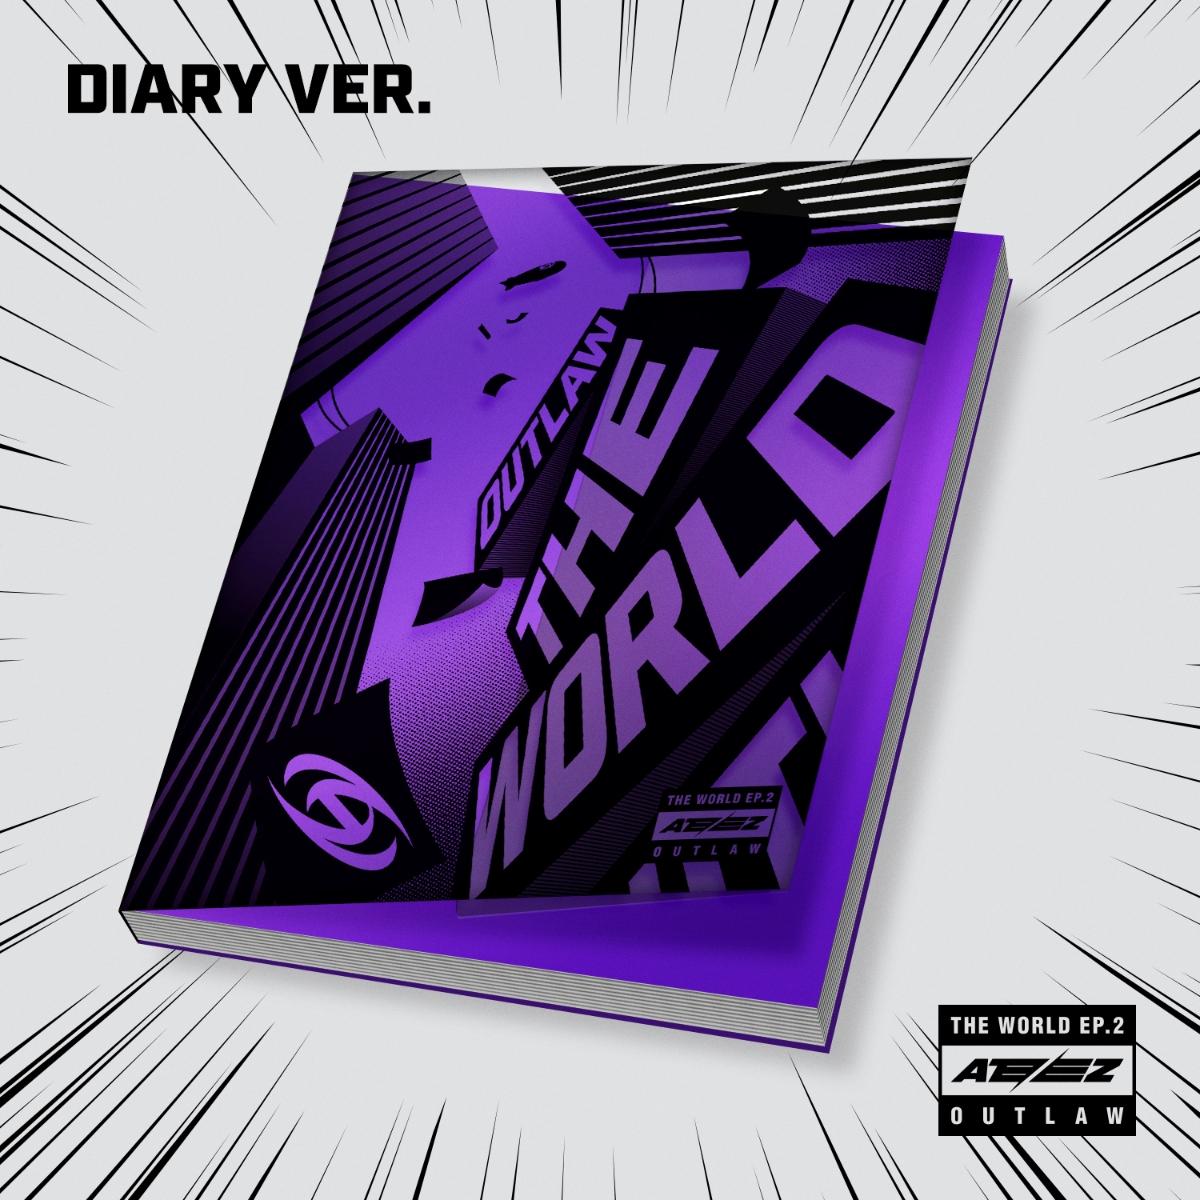 ATEEZ outlaw DIARY ver ジョンホ トレカ | www.scoutlier.com